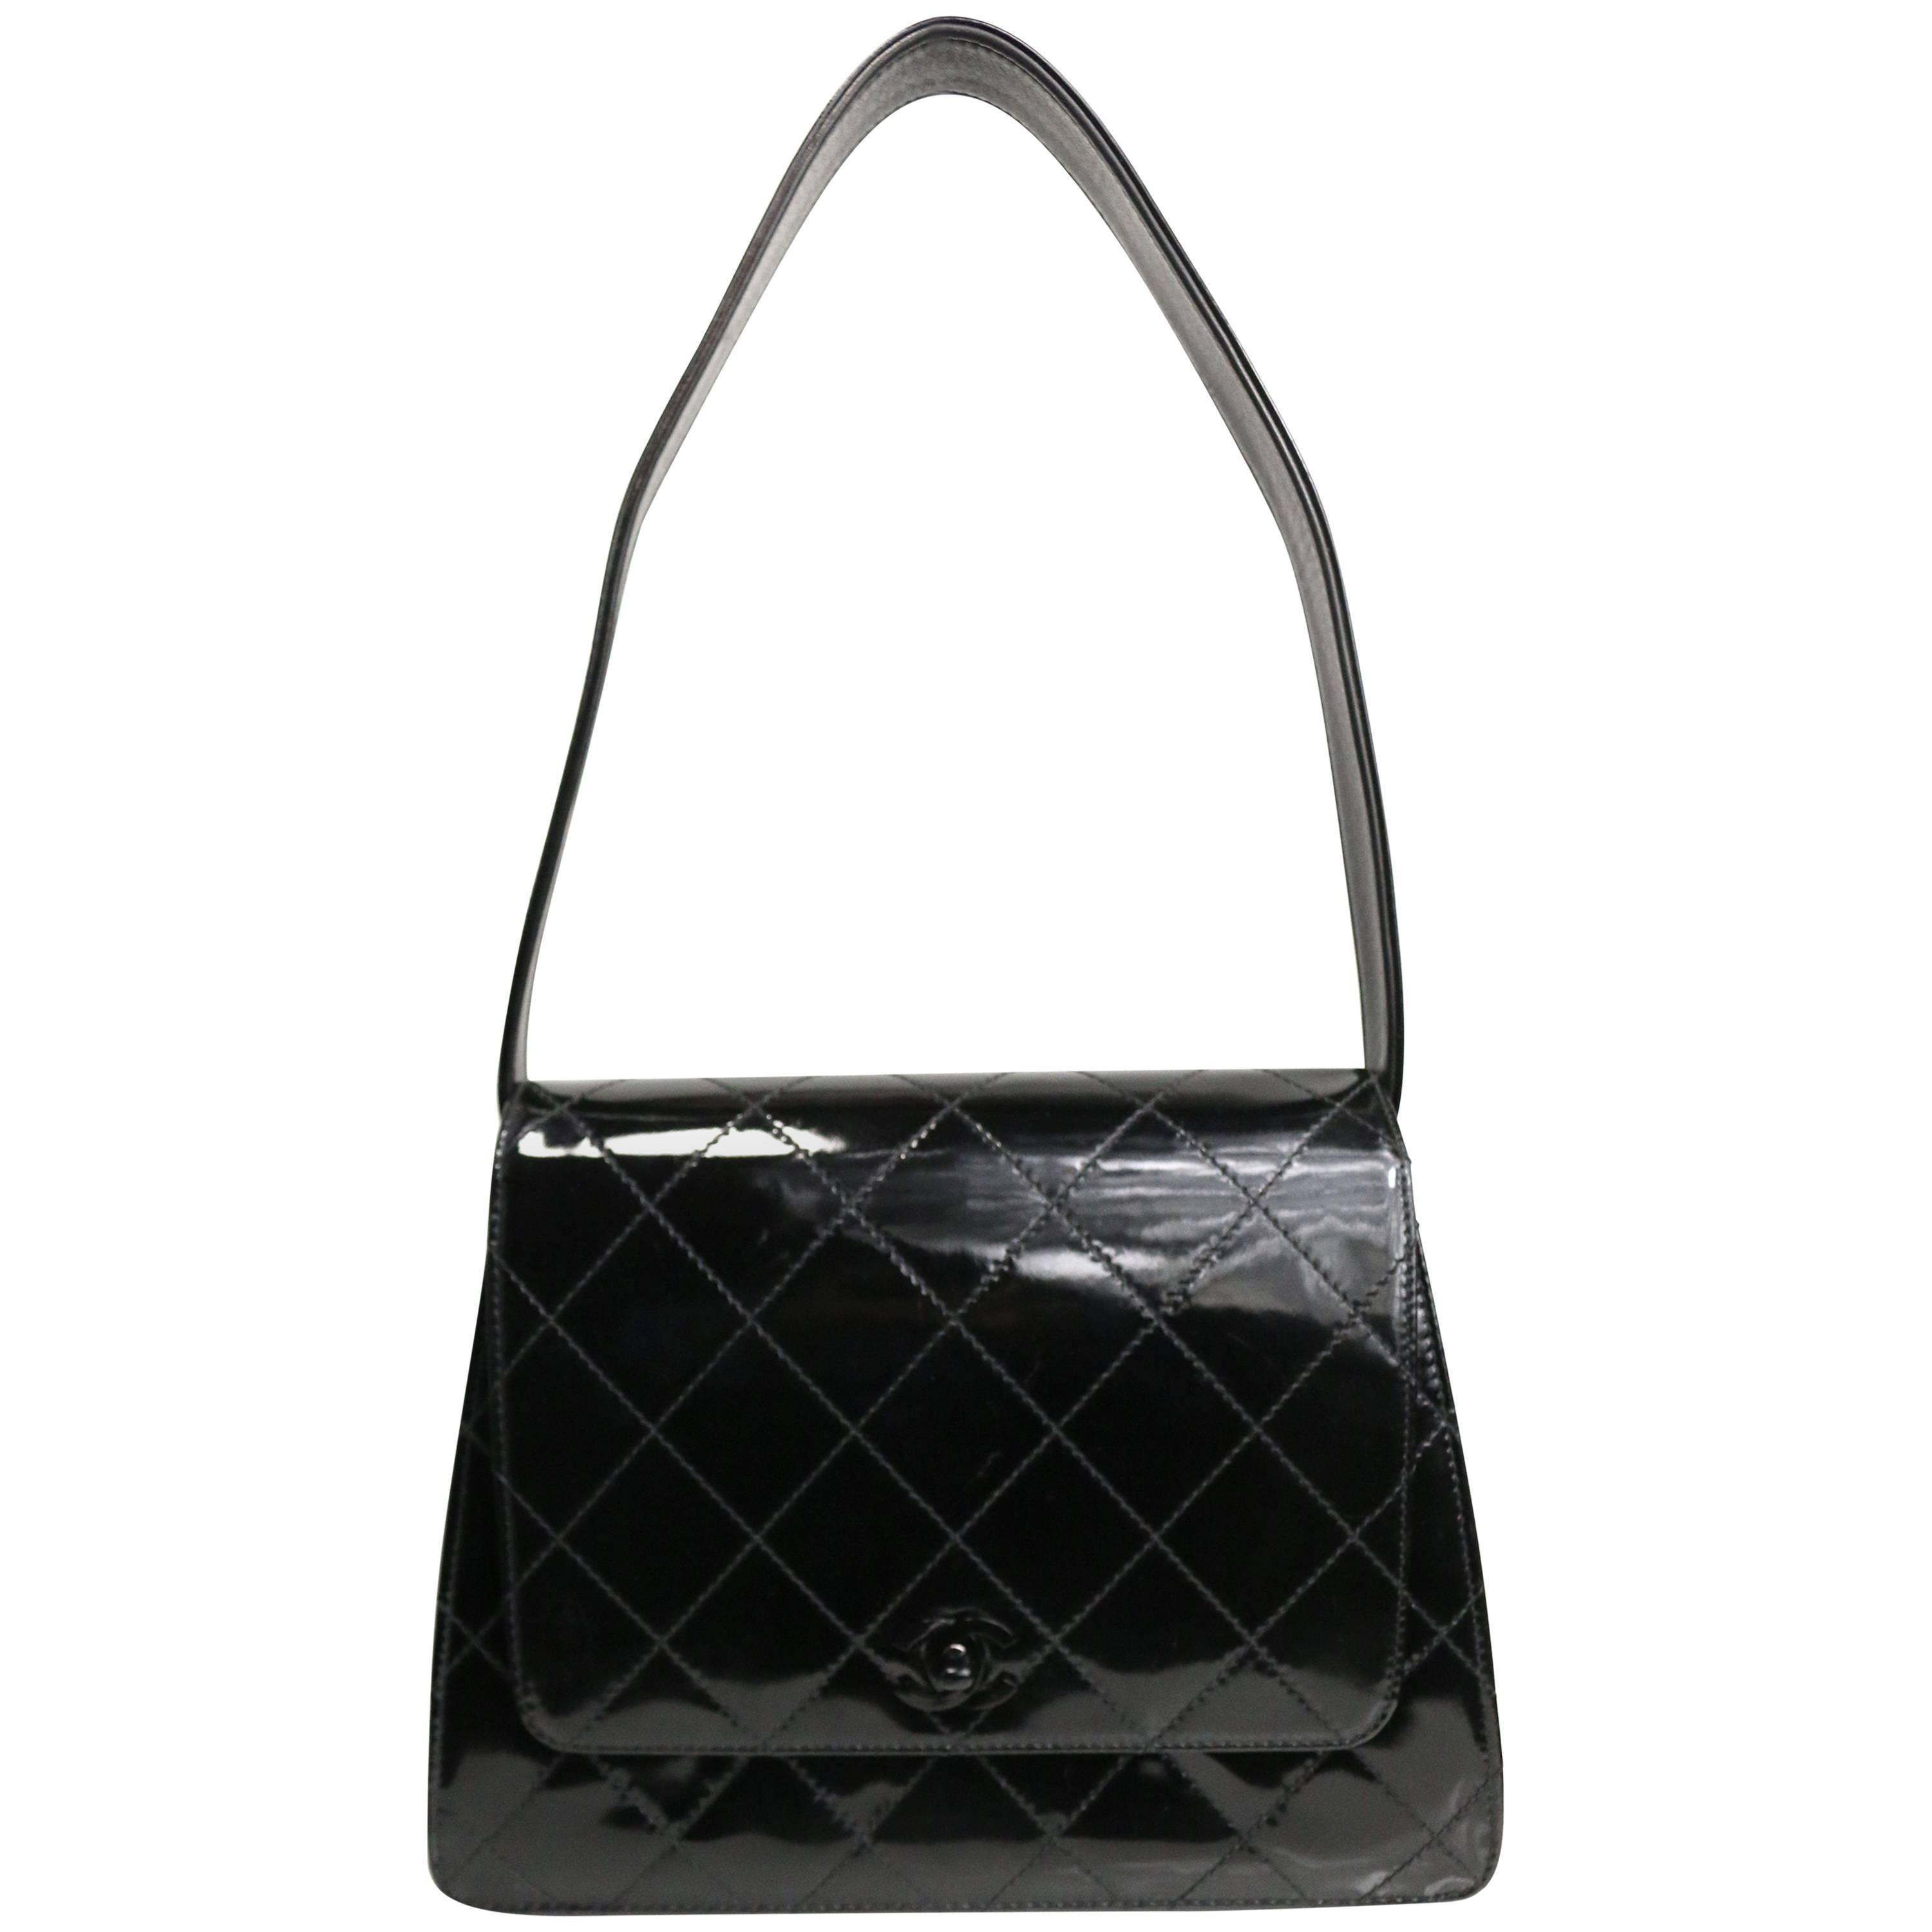 Chanel Black Quilted Patent Leather Handbag